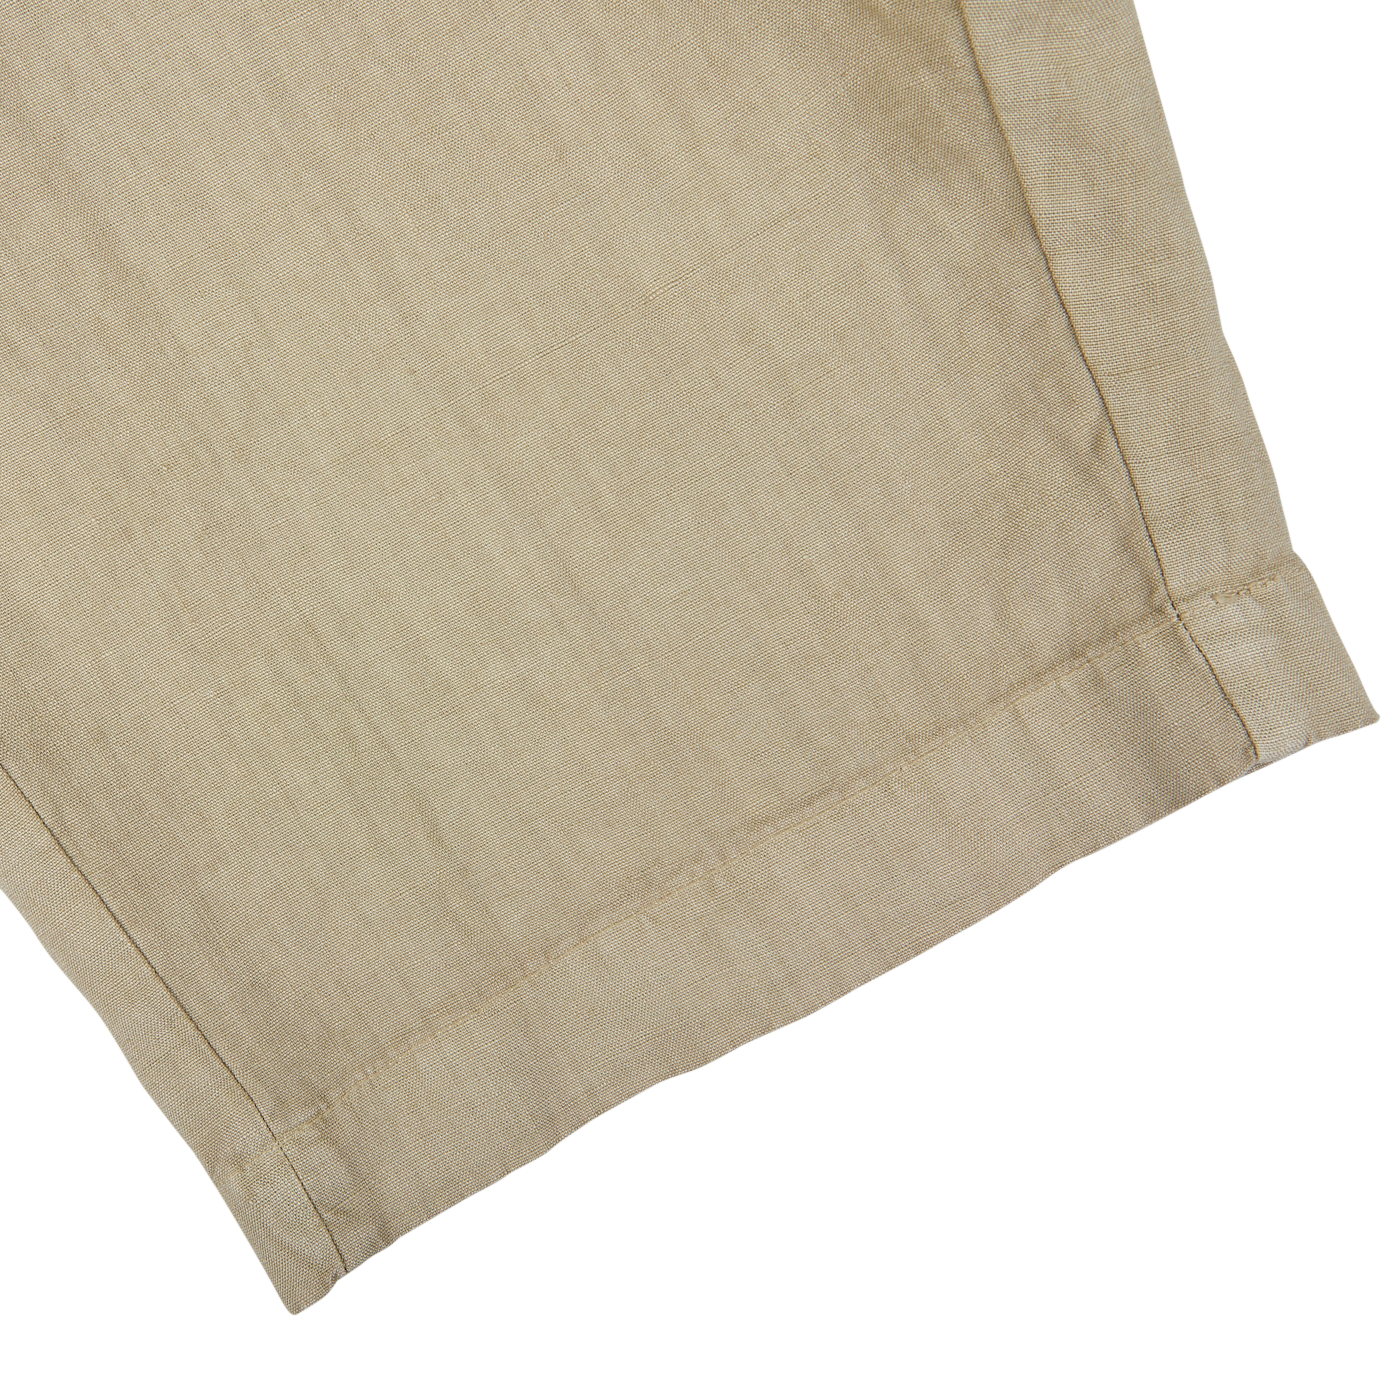 Beige Washed Linen Drawstring Shorts with a neatly stitched hem and a contemporary fit on a white background, by Berwich.